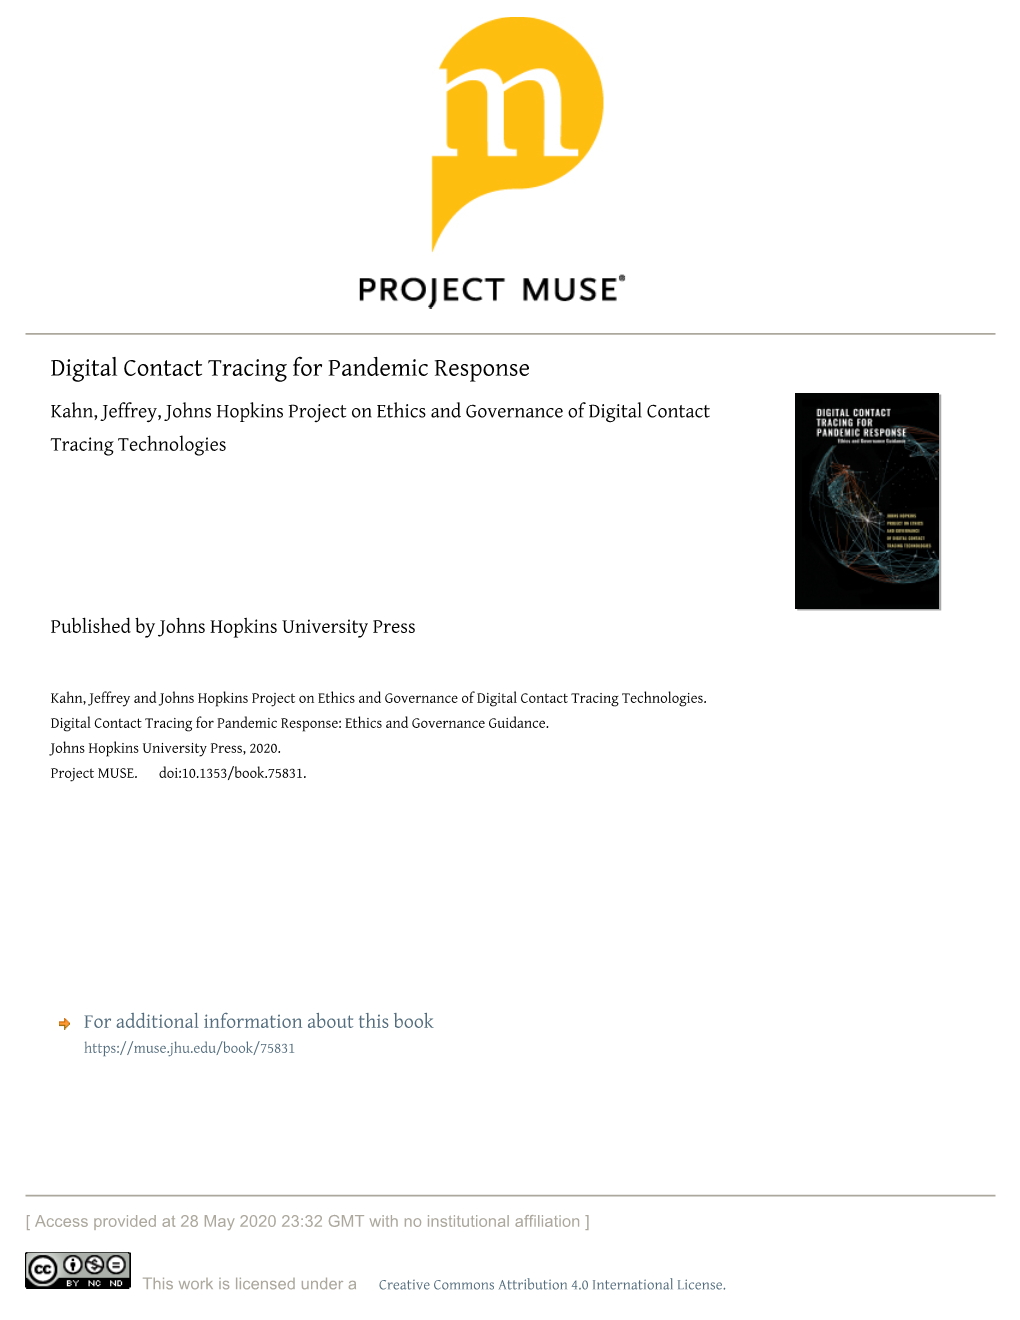 Digital Contact Tracing for Pandemic Response Kahn, Jeffrey, Johns Hopkins Project on Ethics and Governance of Digital Contact Tracing Technologies